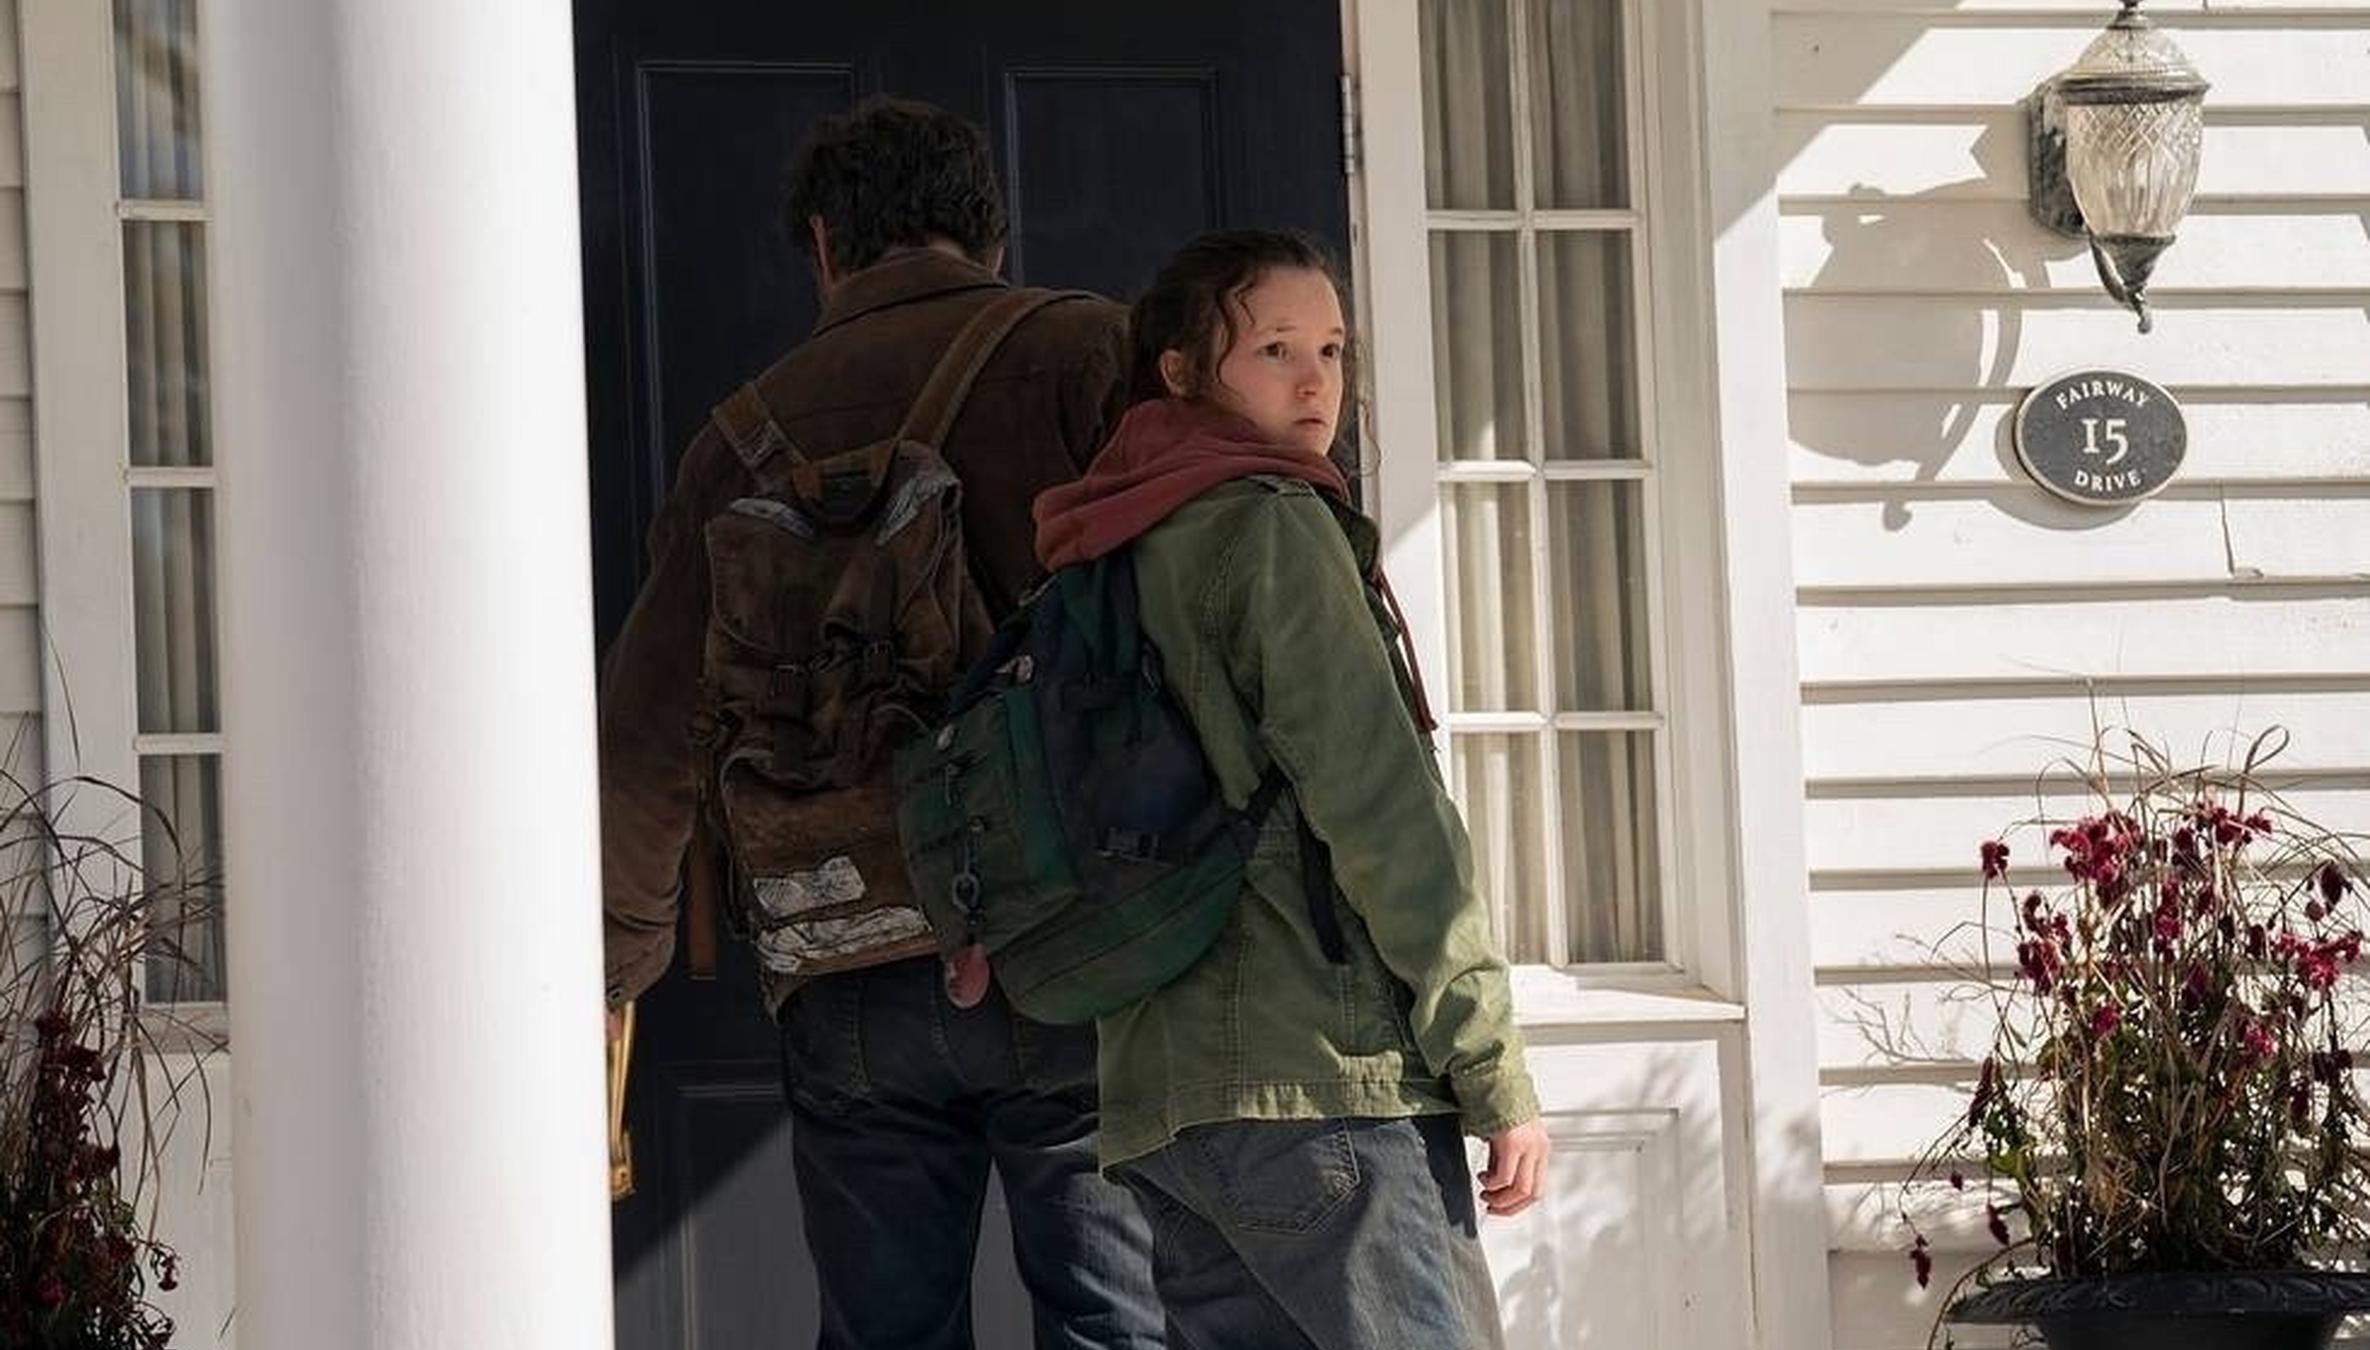 THE LAST OF US Episode 2 Audience Up 22% in Largest Jump Ever For An HBO  Original Drama Series